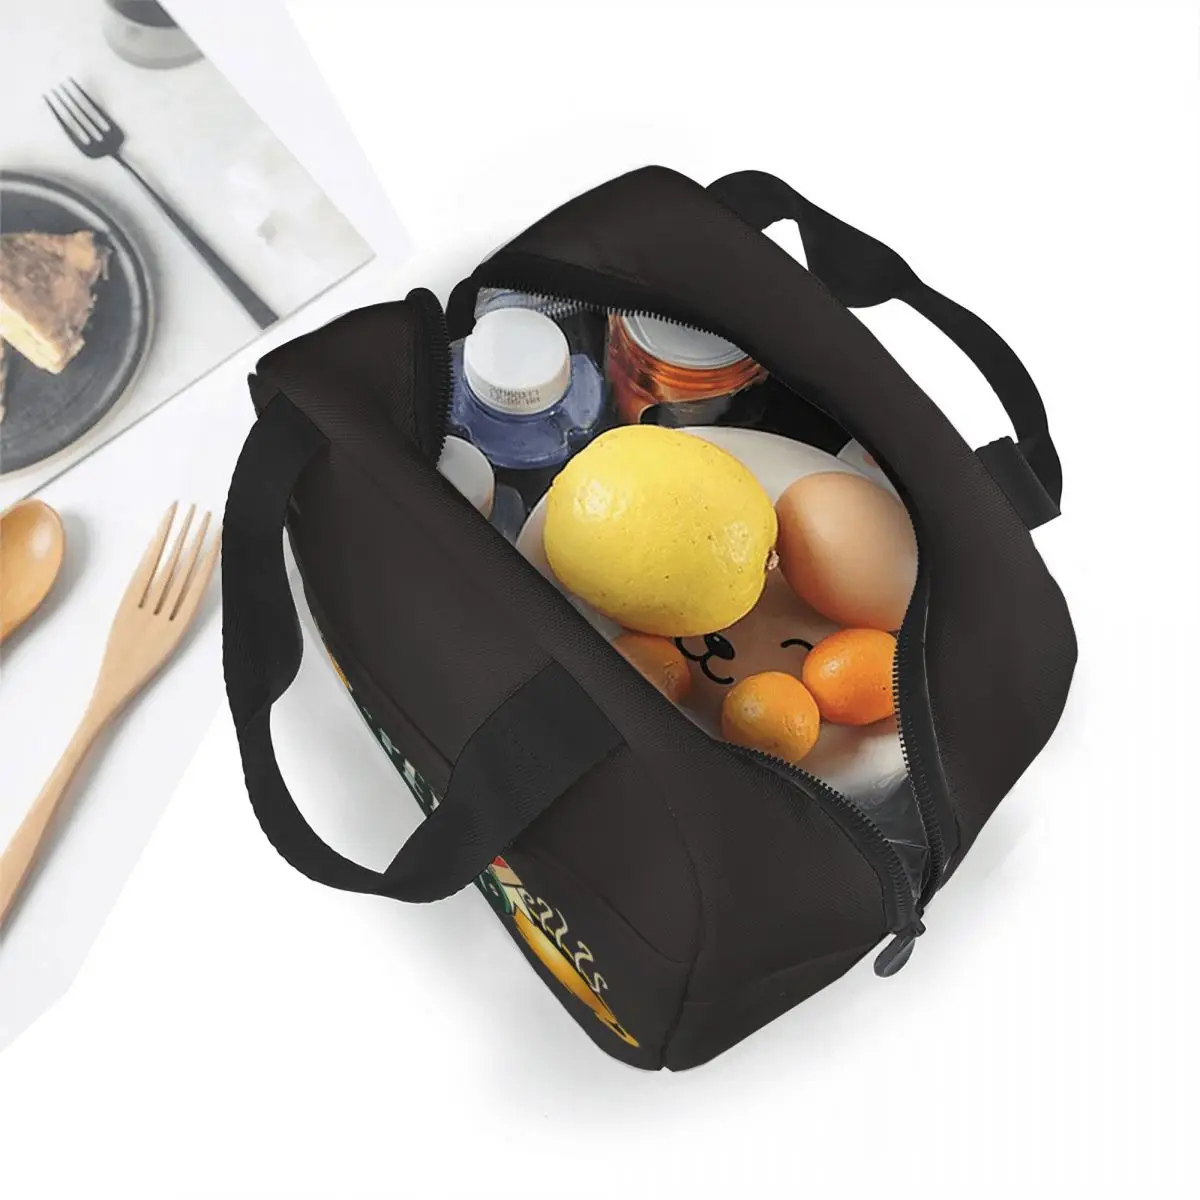 Pair Best Friends Central Park Insulated Lunch Bag Friends Tv Show Lunch Container Cooler Bag Tote Lunch Box Food Handbags